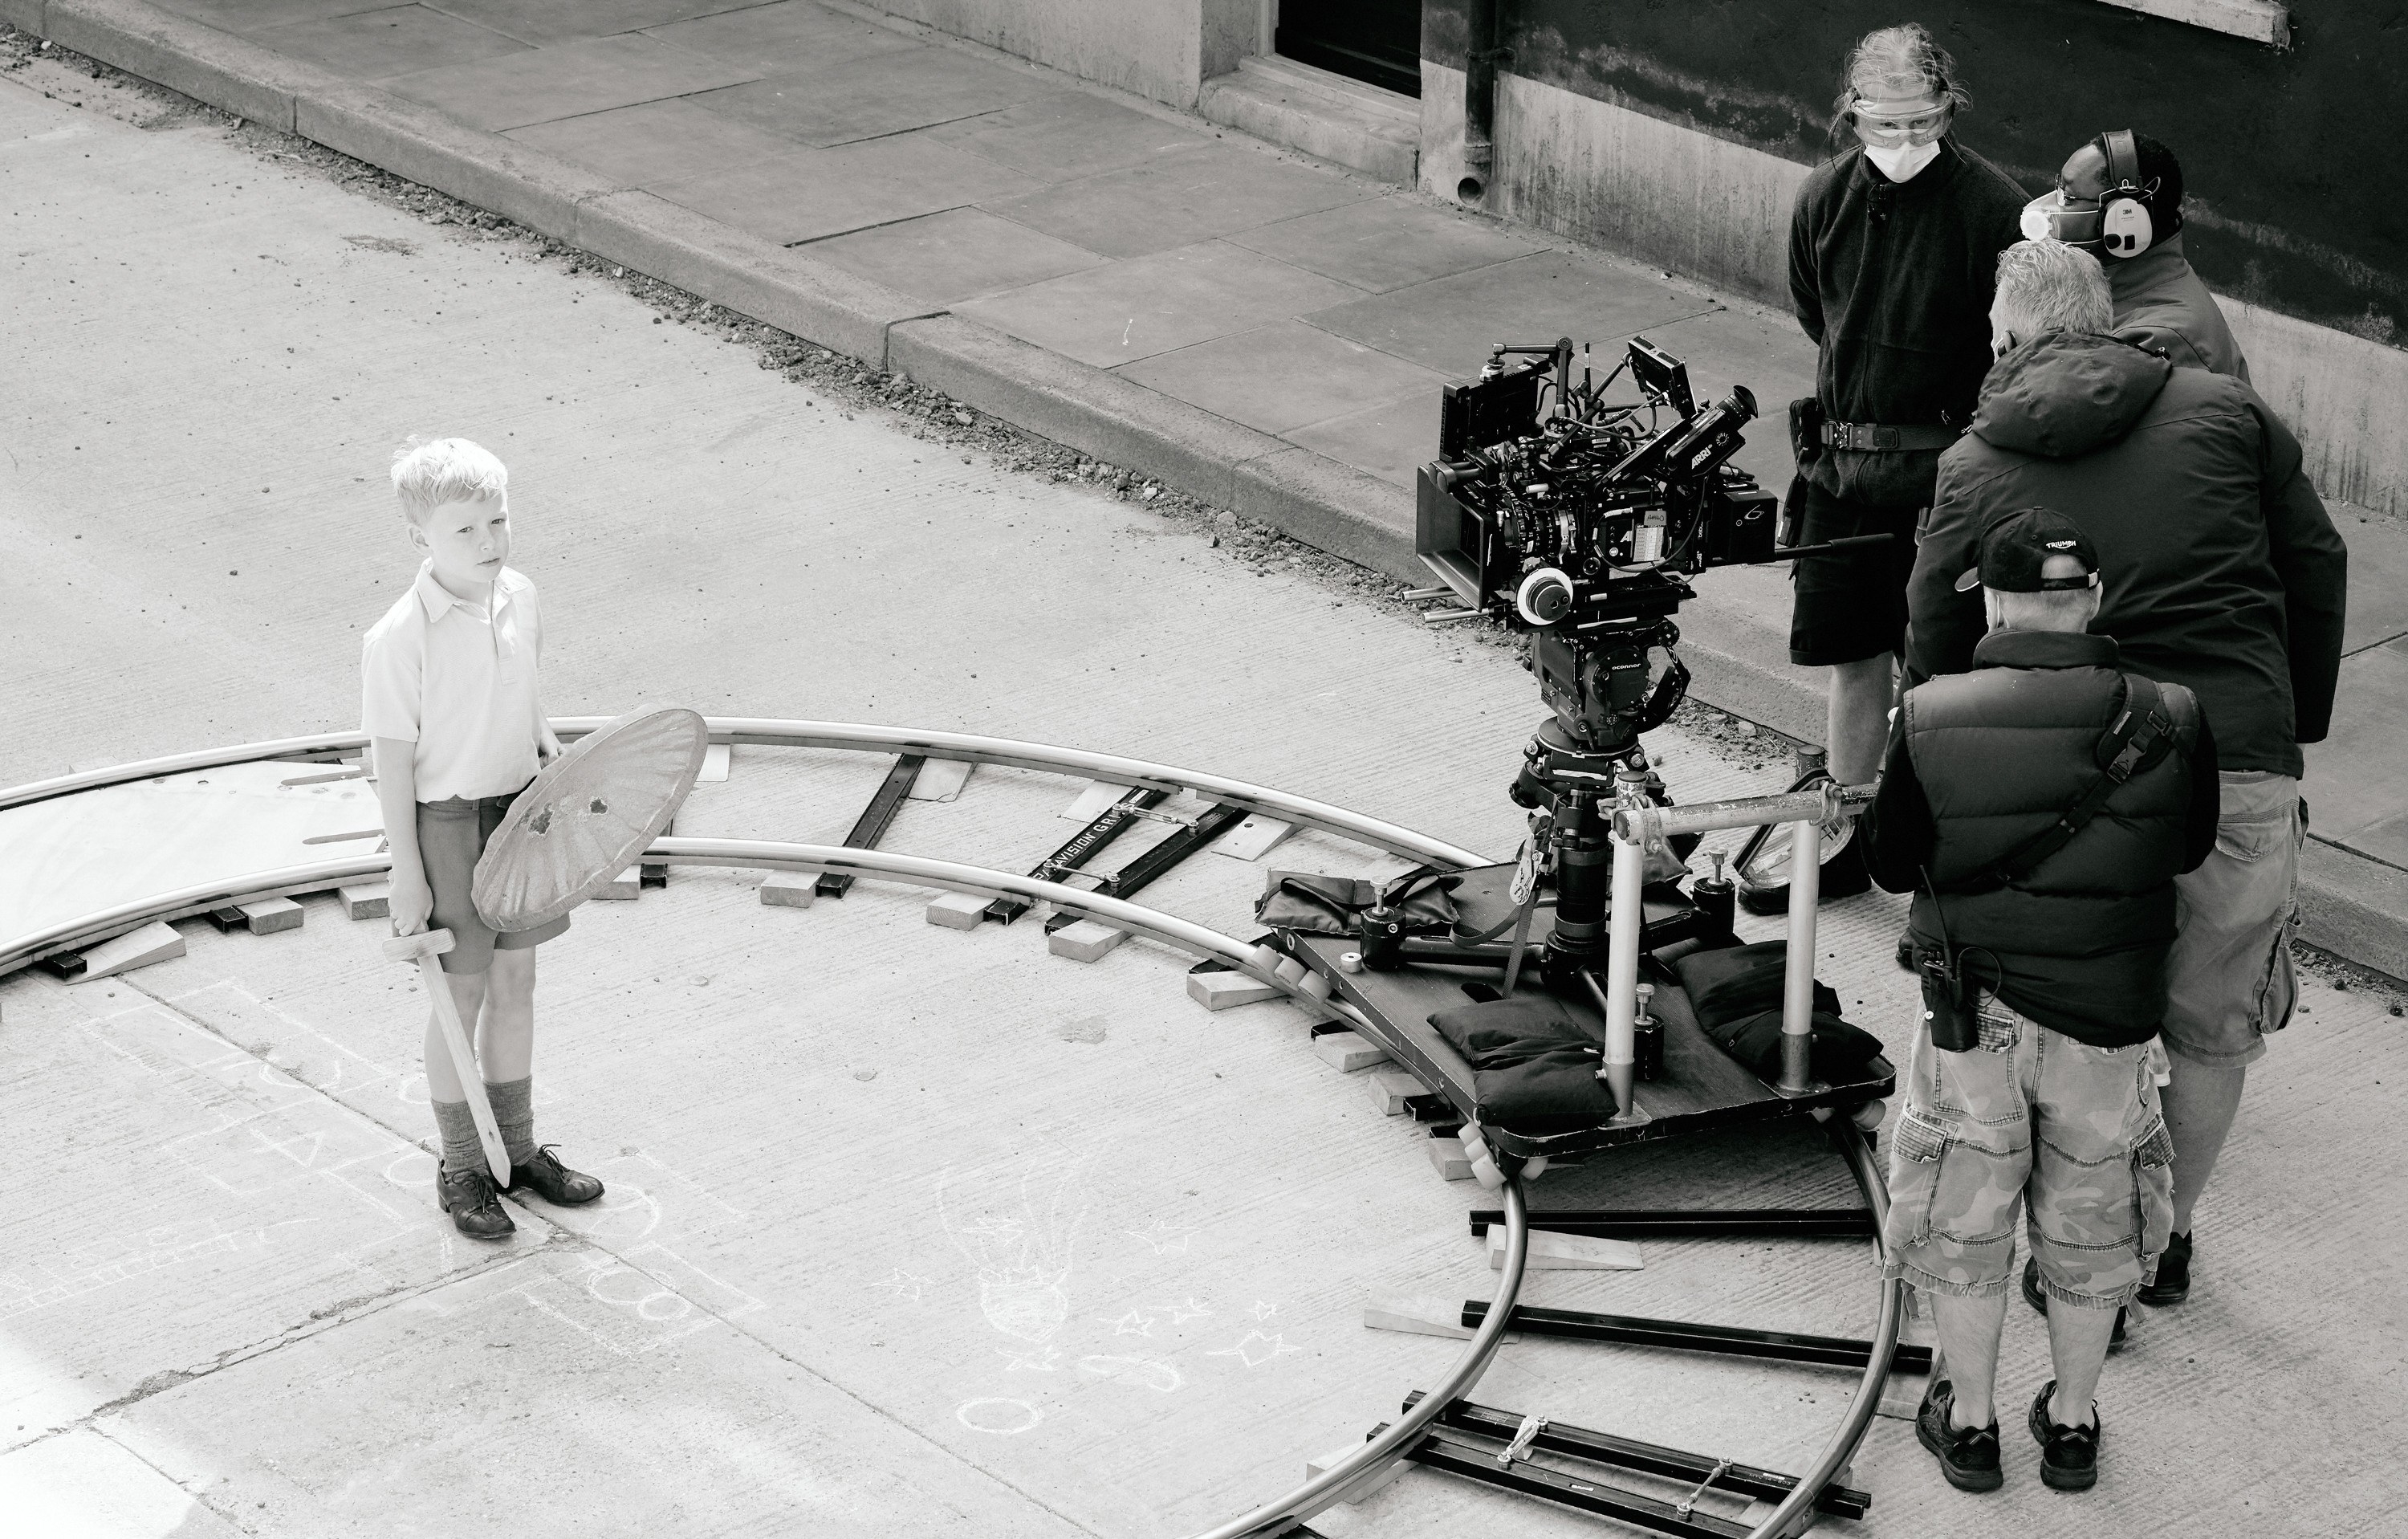 A camera crew set up circling around the young actor Jude Hill, who holds a toy sword and garbage can lid shield